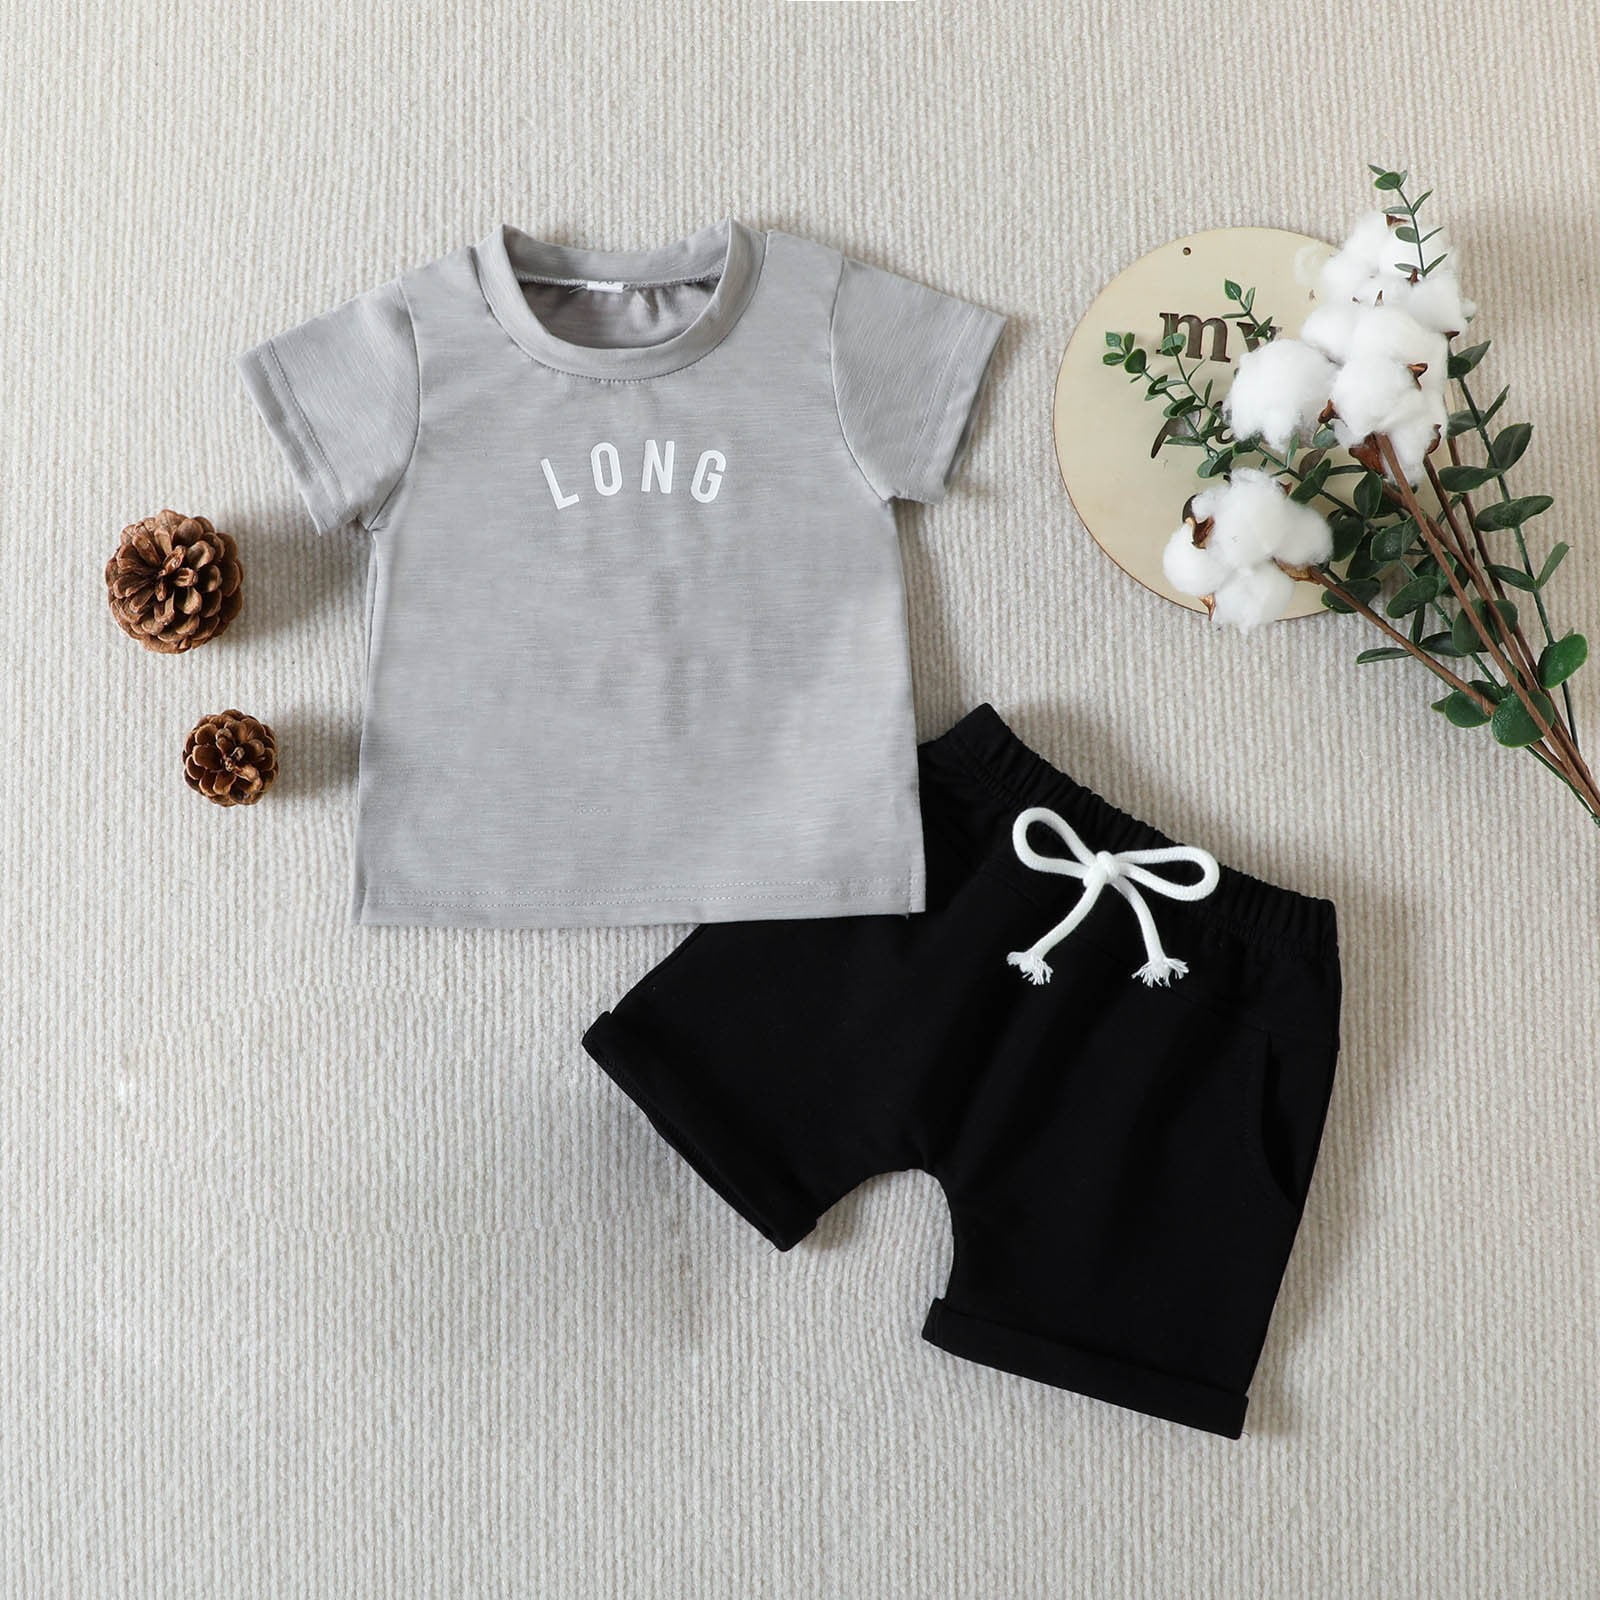 Baby Boy Clothes 4 5 Years Toddler Boutique Outfits Fashion Print Splicing  Coats And Pants Kids Bebes Jogging Suits Tracksuits From Dtysunny, $14.18